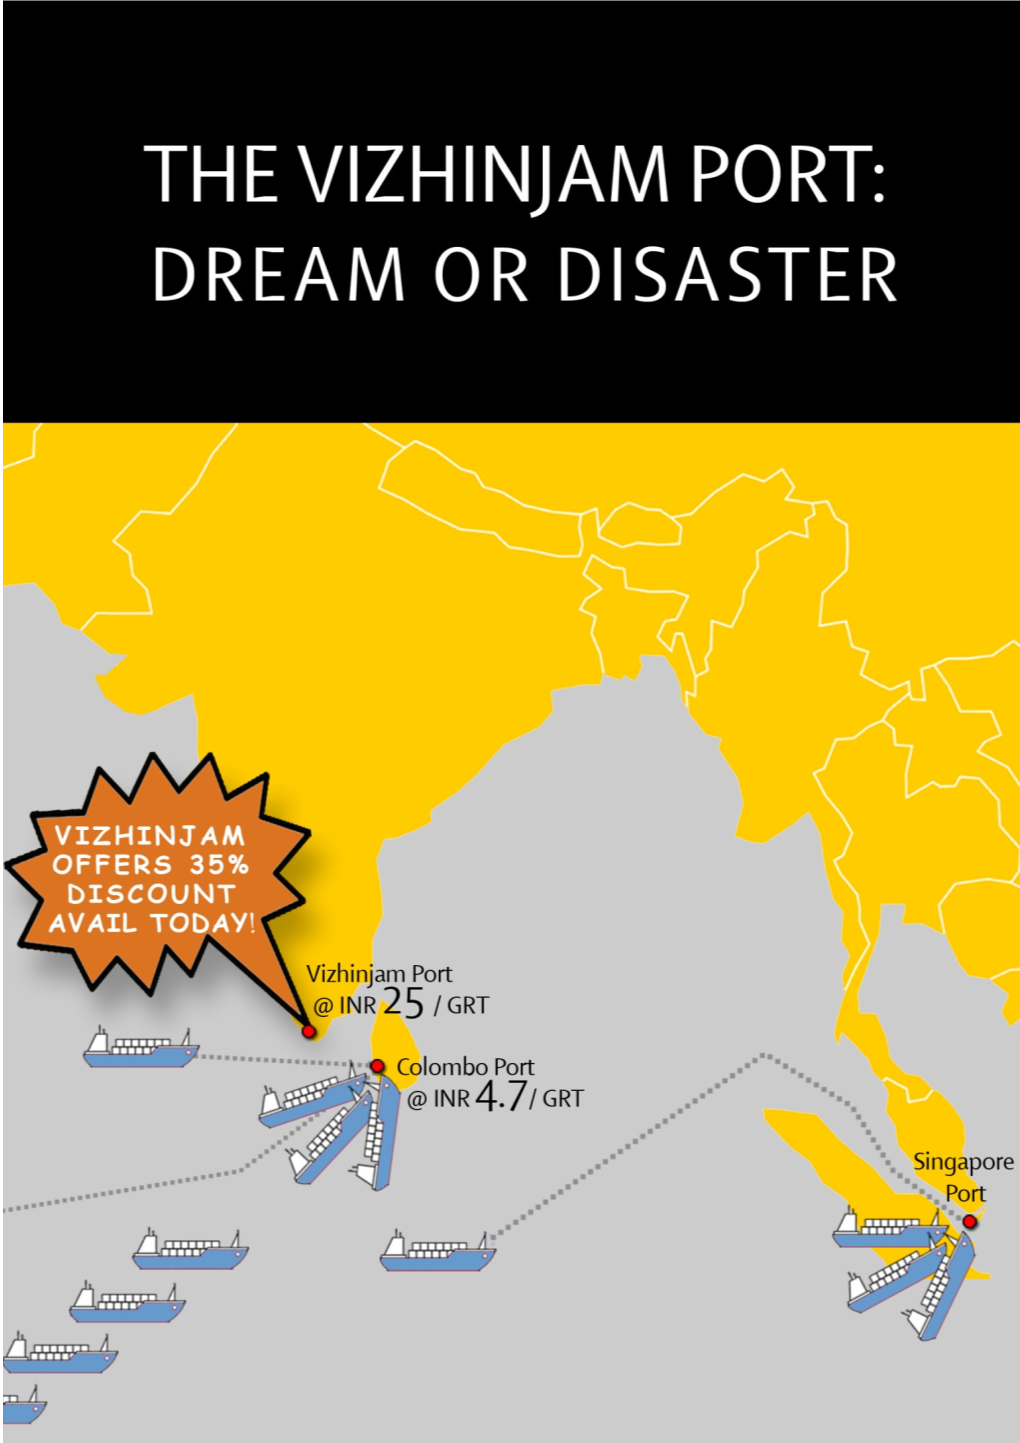 THE VIZHINJAM PORT: DREAM OR DISASTER a Study of the Economic, Environmental & Social Impacts of the Port